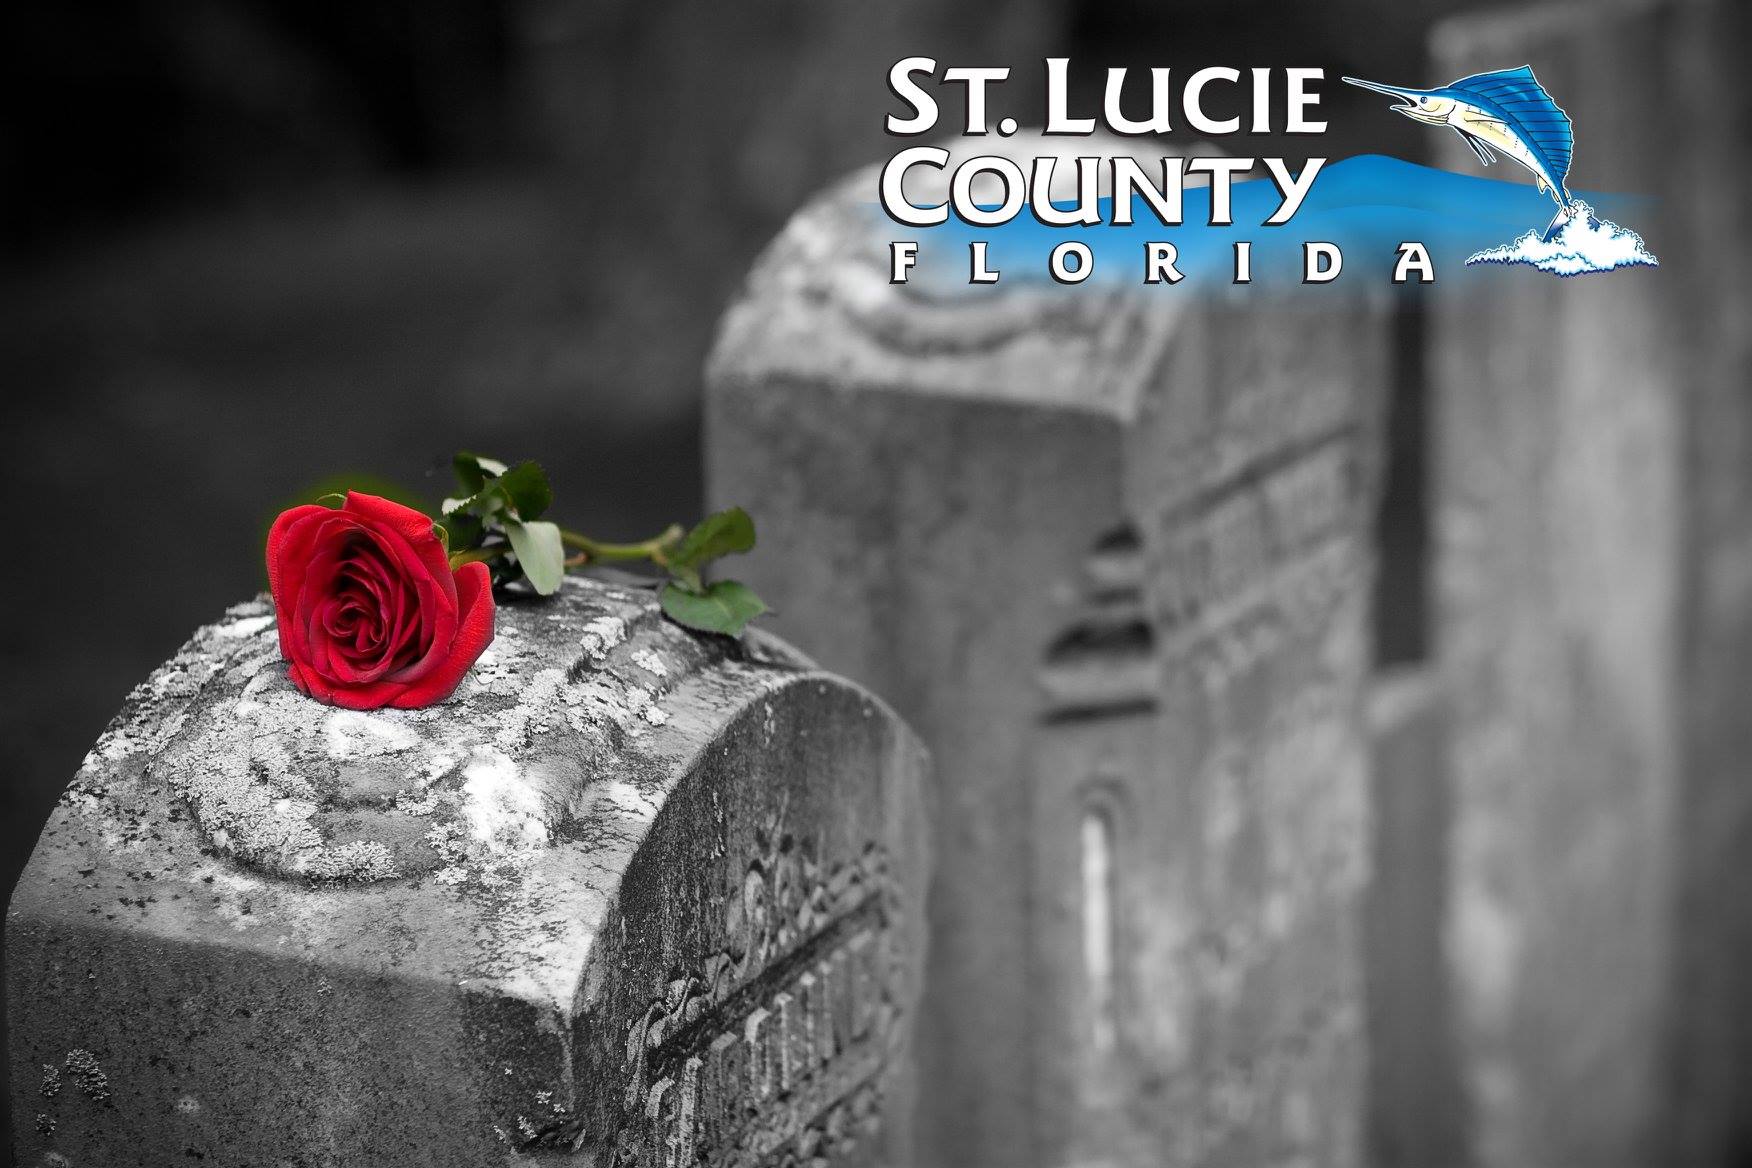 St Lucie County On Twitter St Lucie Countys Community Services Department Is Looking For 